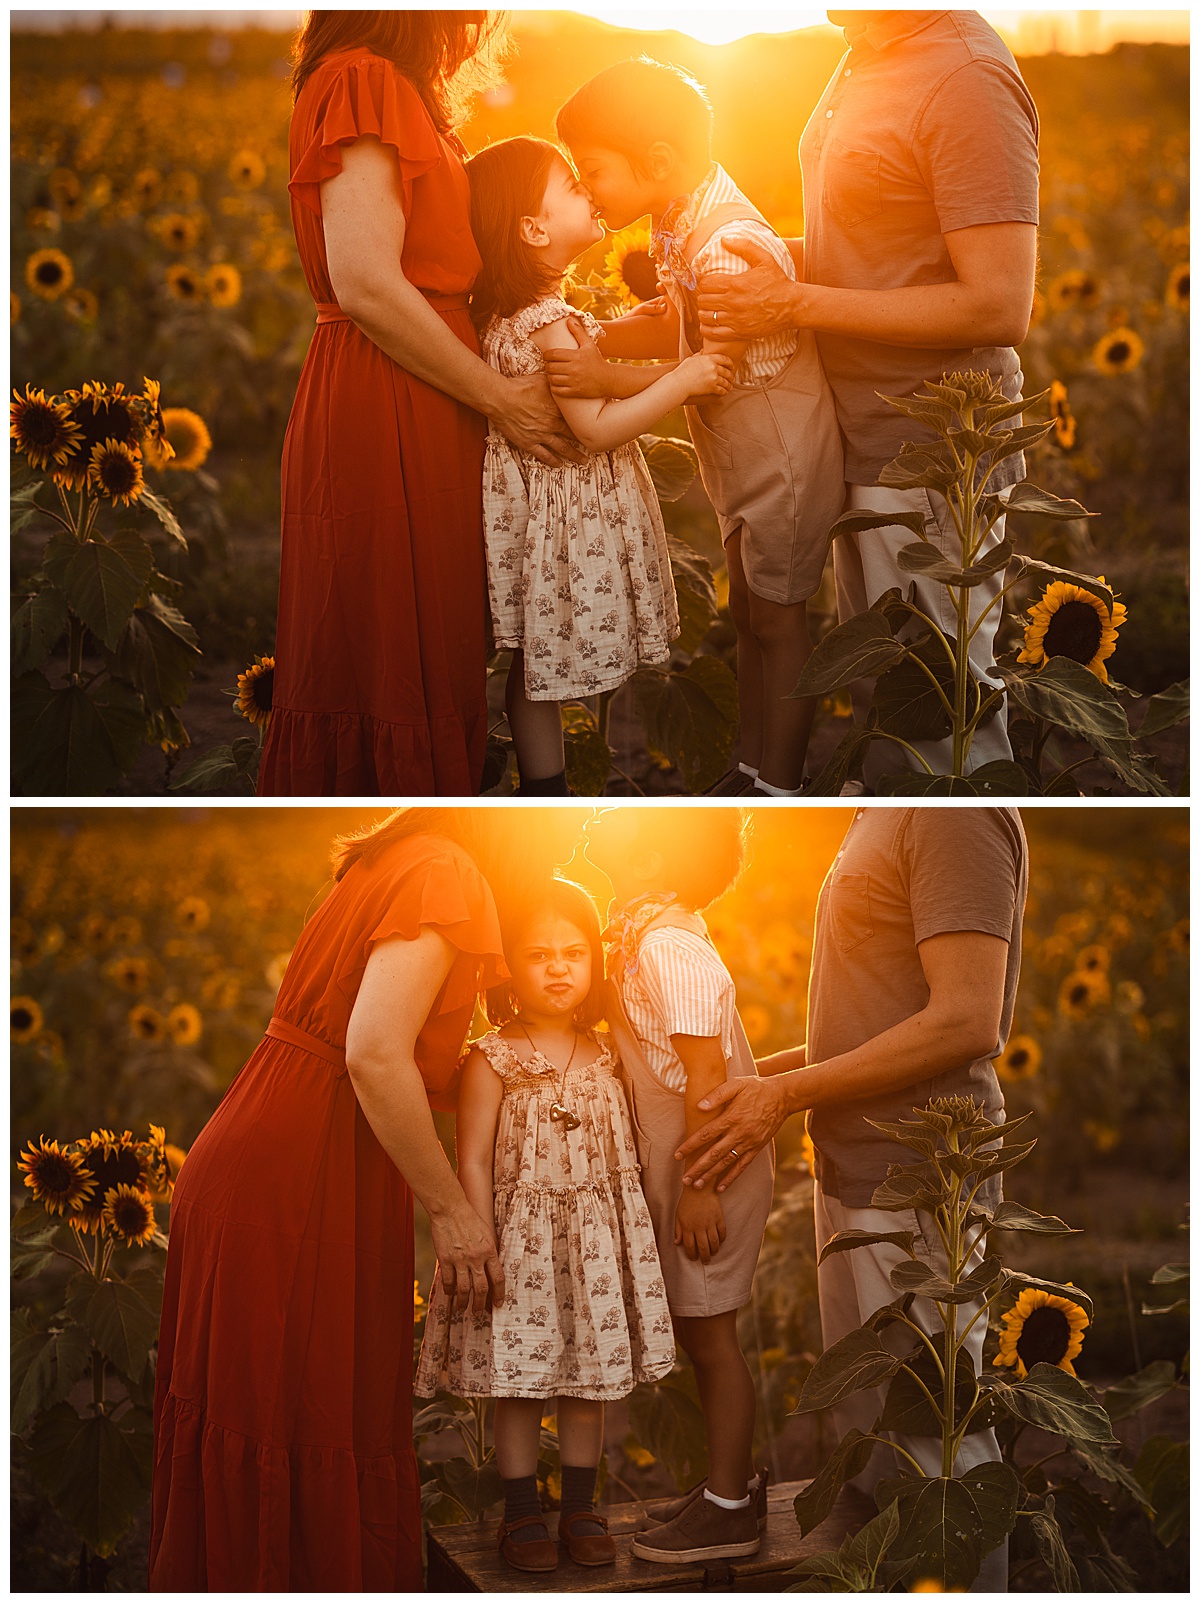 Kids smile at their parents during Sunflower Field Family Photos